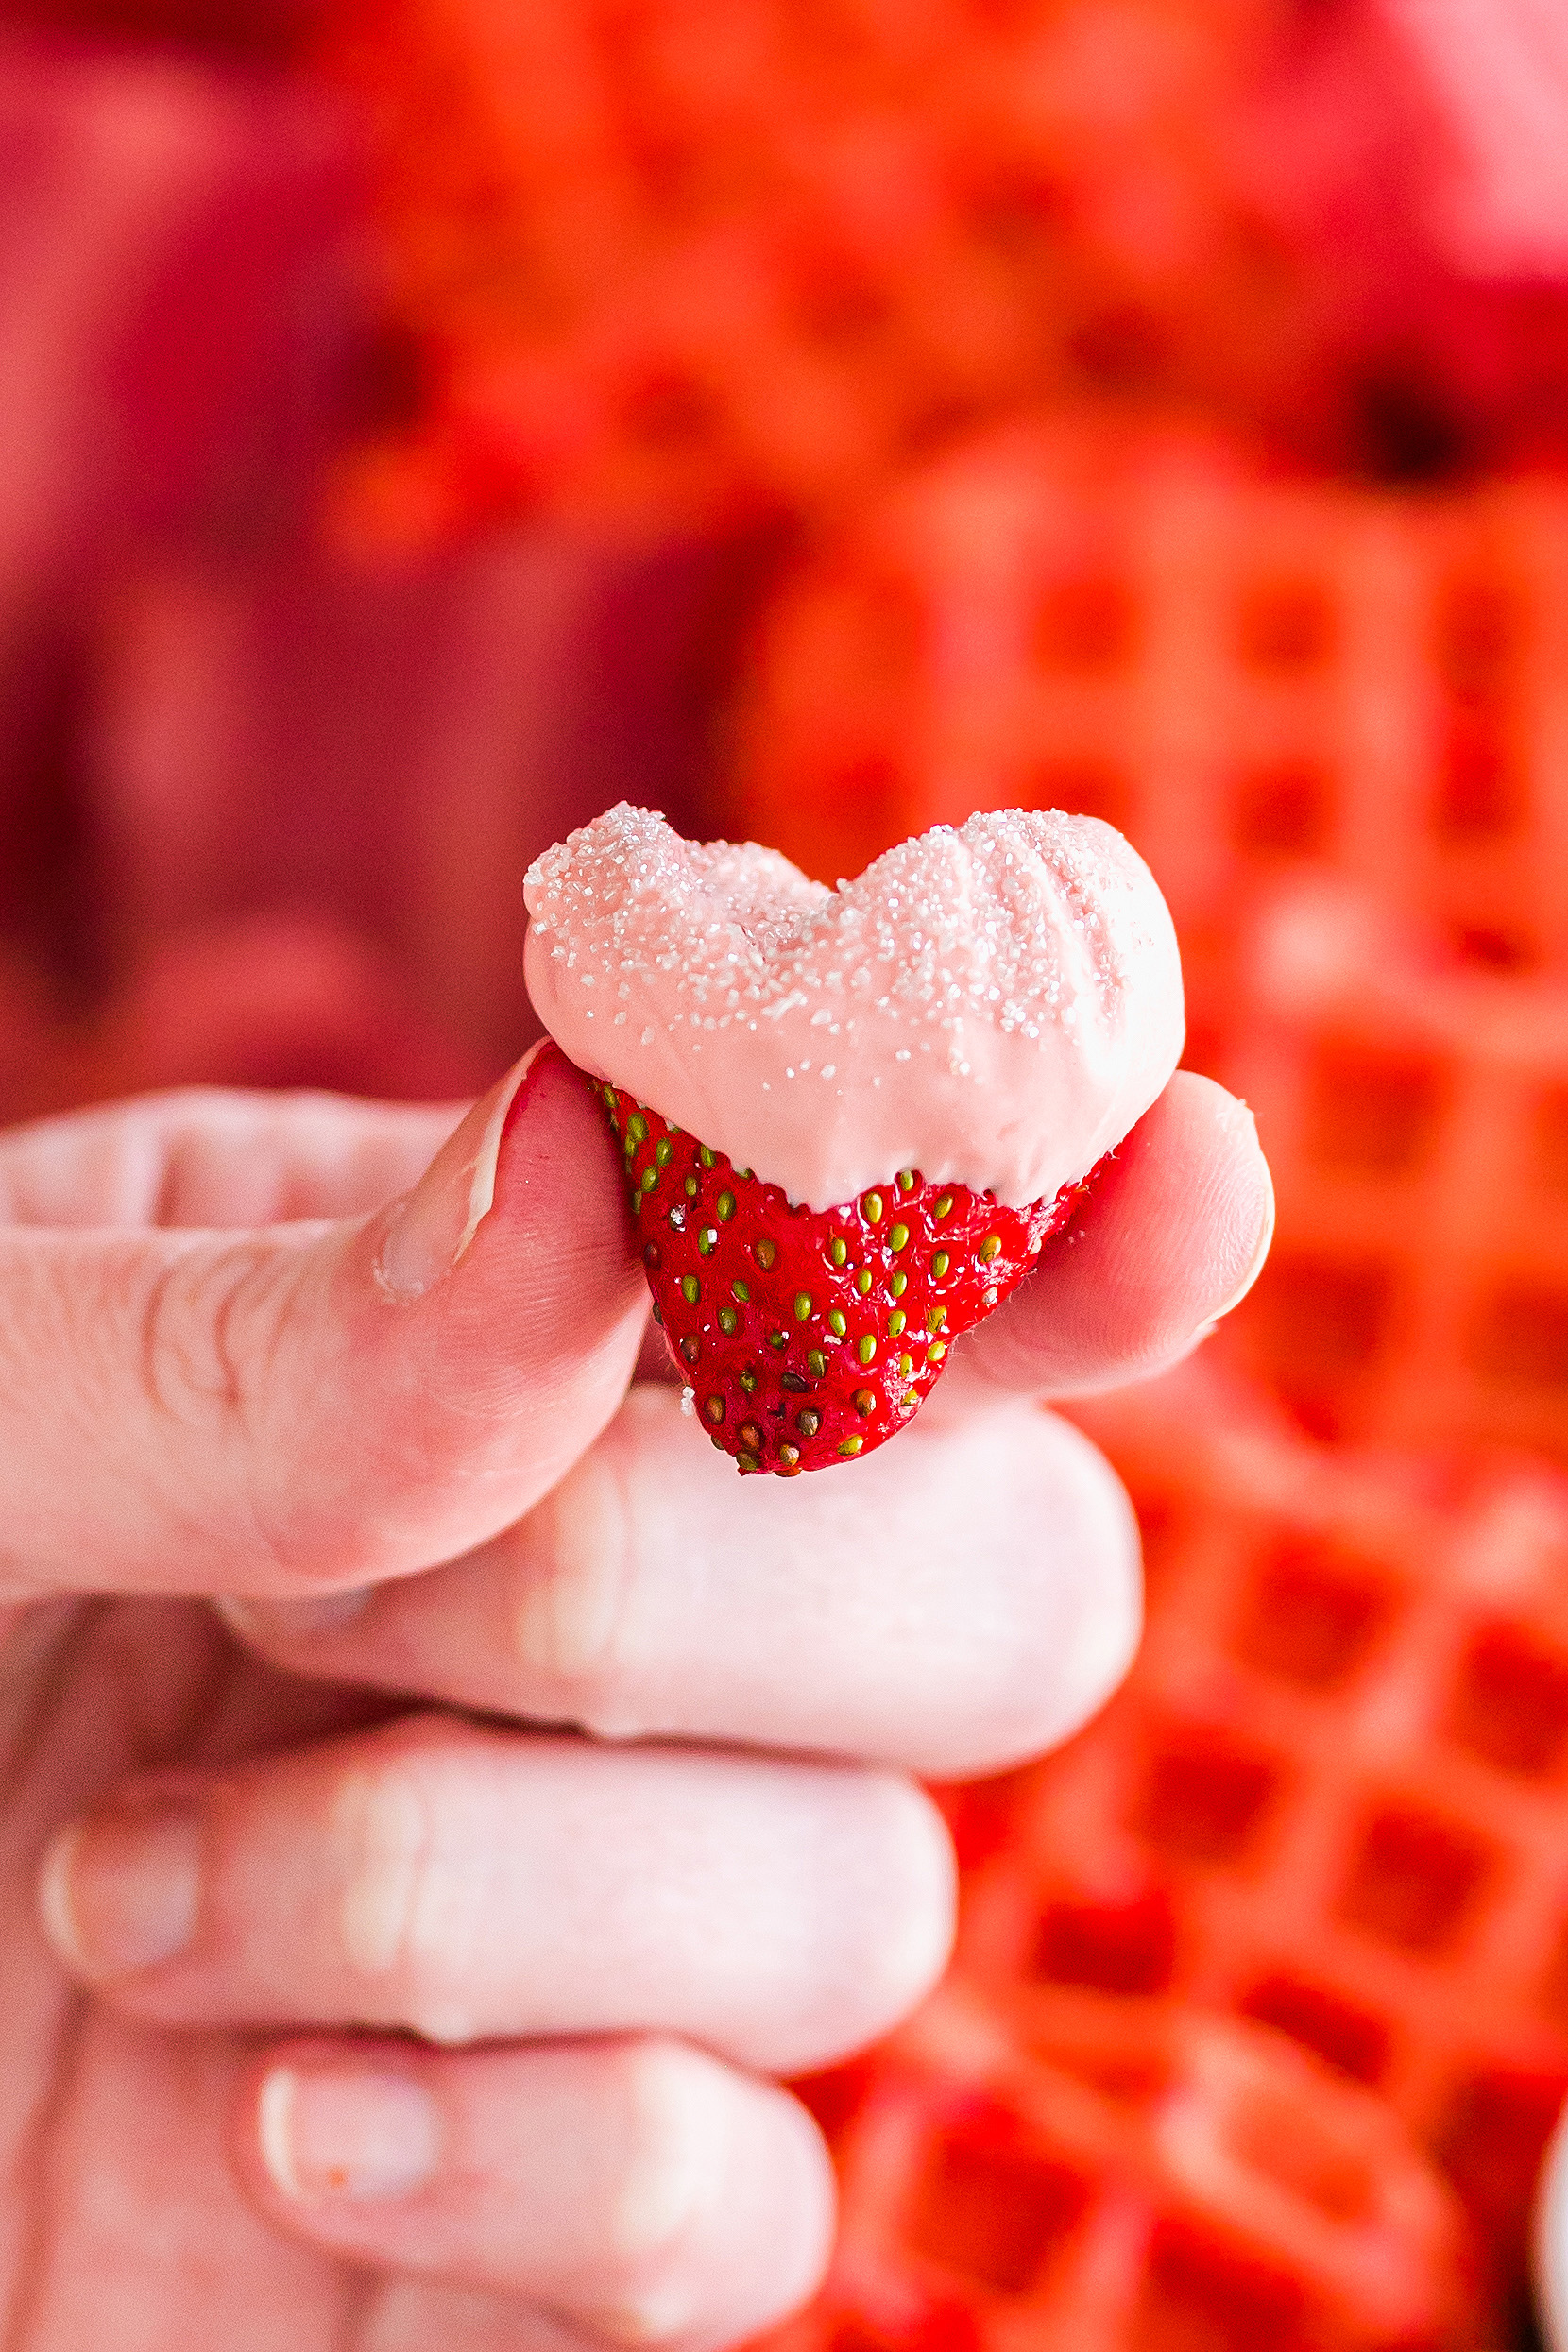 a hand holding a heart shaped strawberry dipped in pink frosting